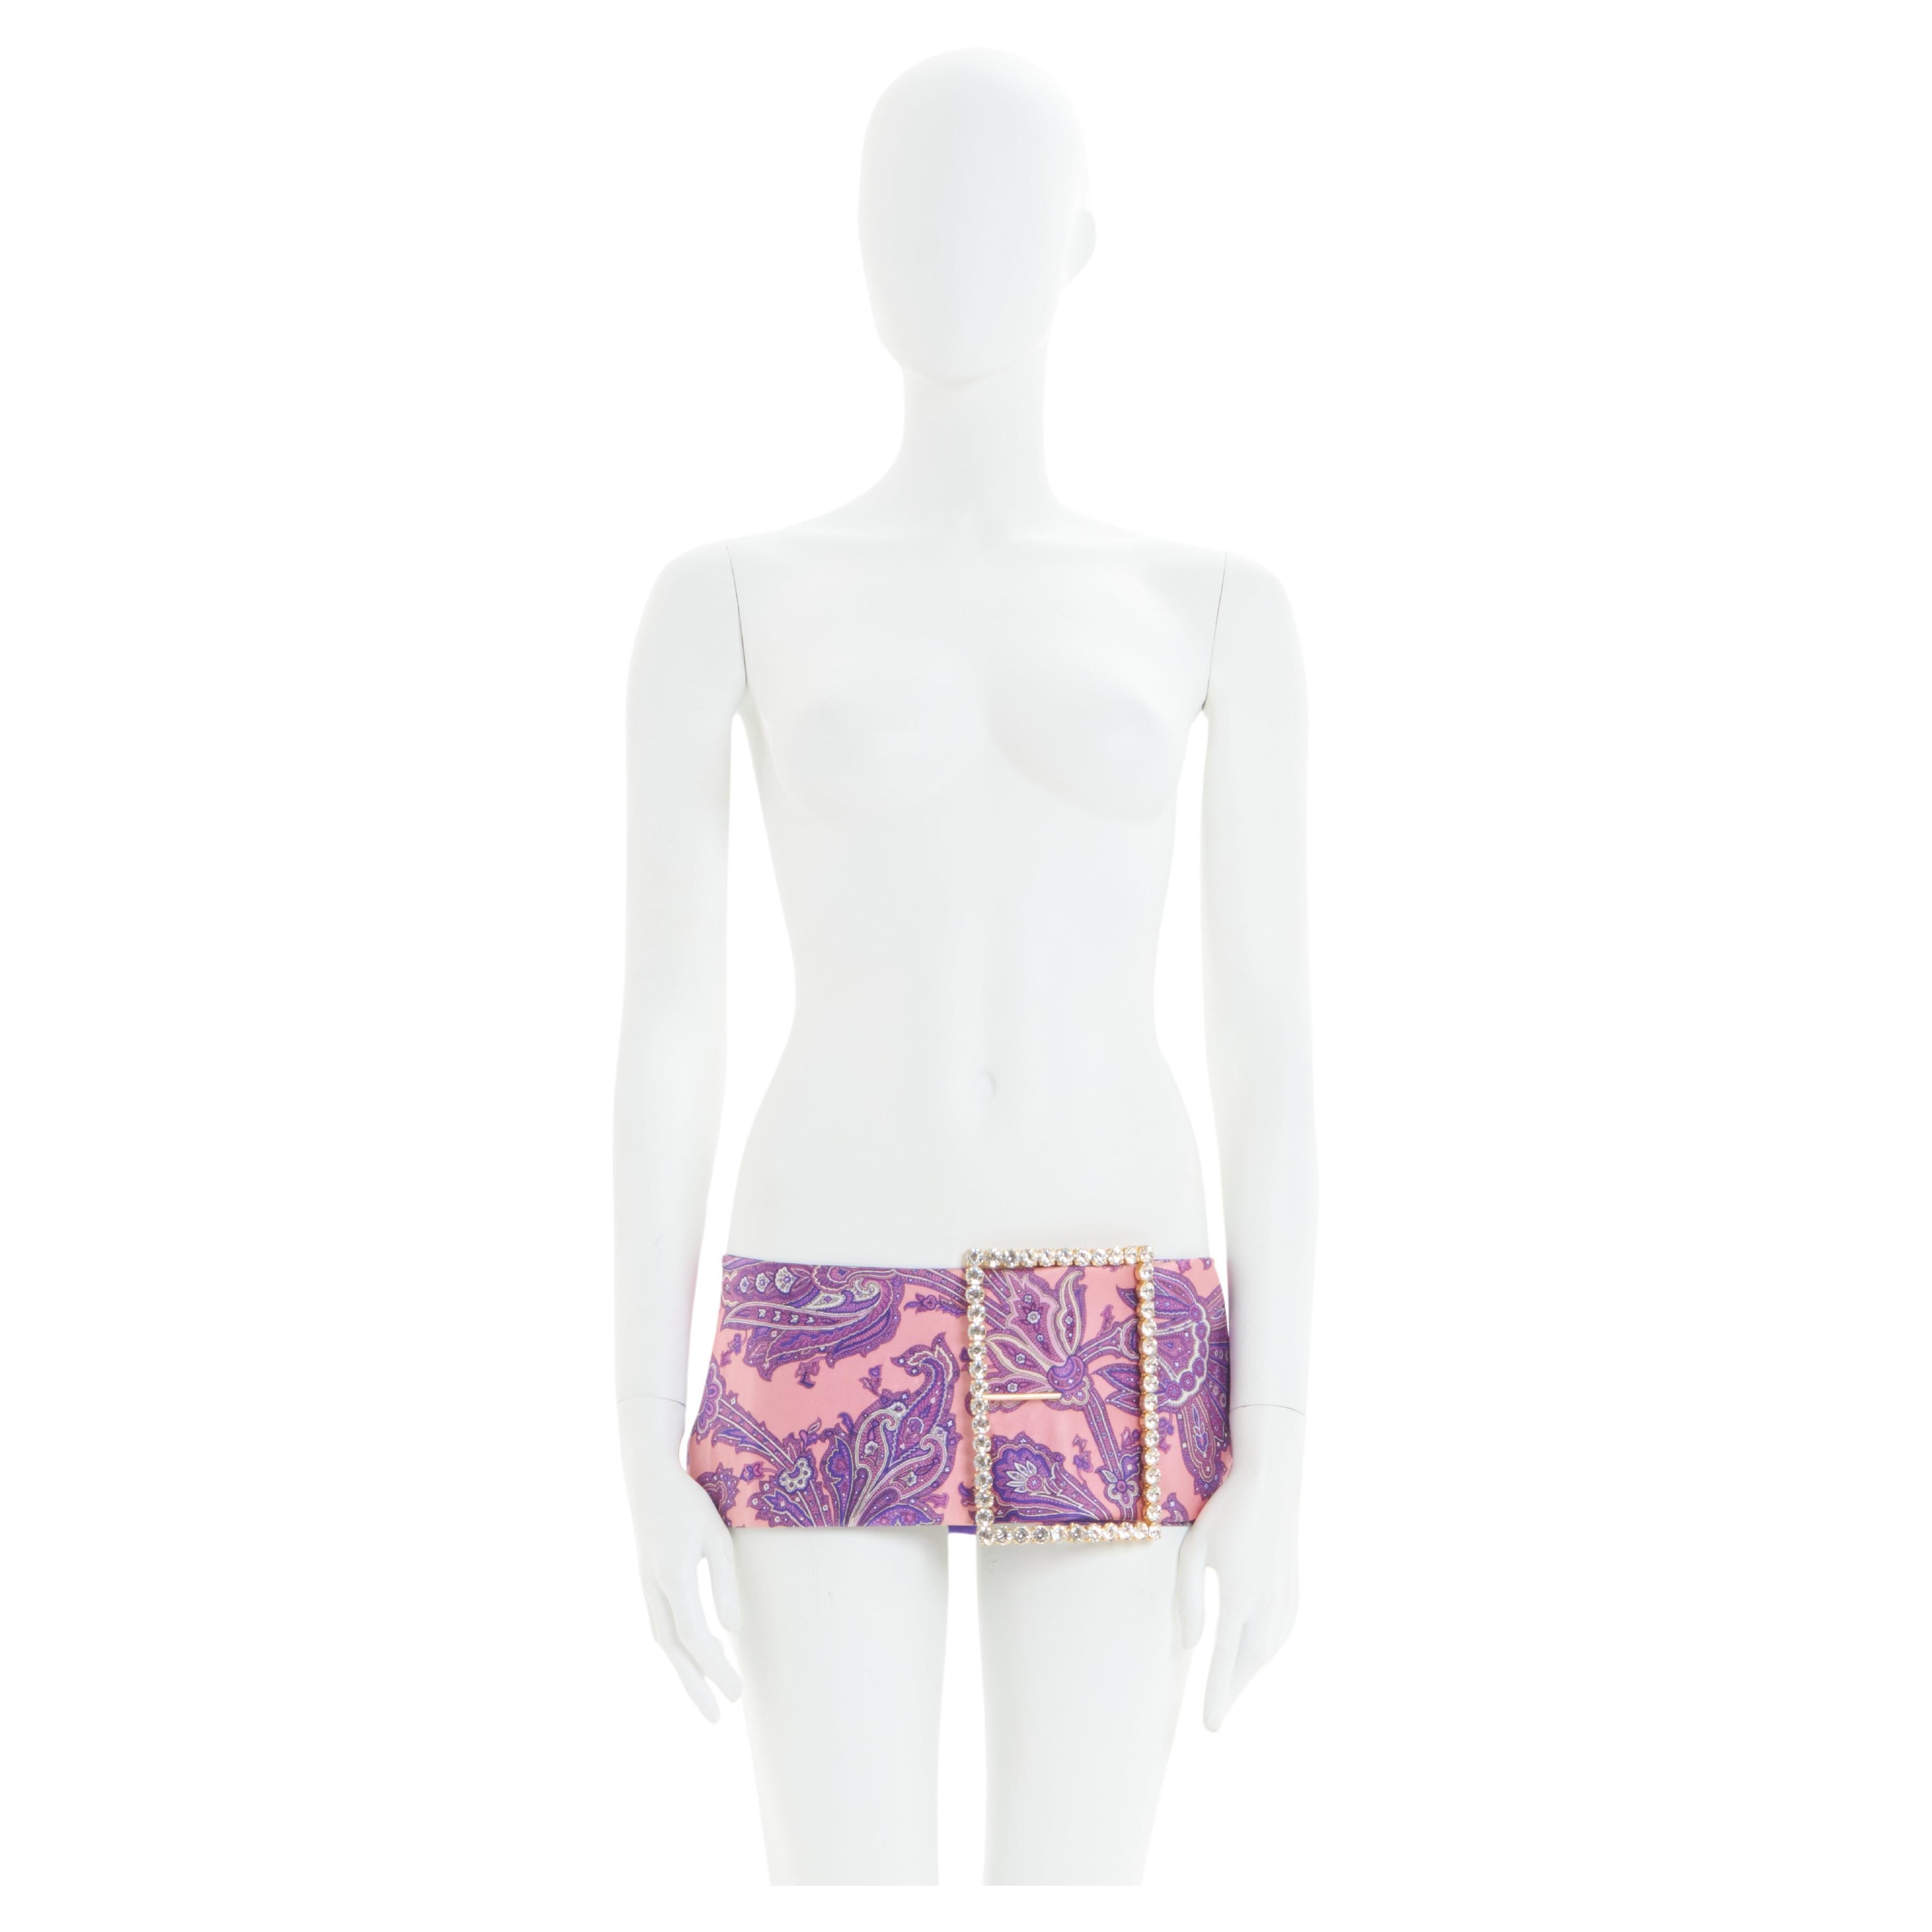 - Archival Dolce & Gabbana Micro Mini Skirt
- Mix & Match Collection
- Sold by Skof.Archive 
- Spring - Summer 2000
- Purple & Pink paisley printed silk 
- Oversized Swarovski crystal belt buckle 
- Silk lining 
- Velcro closure 
- Length: 18 cm /